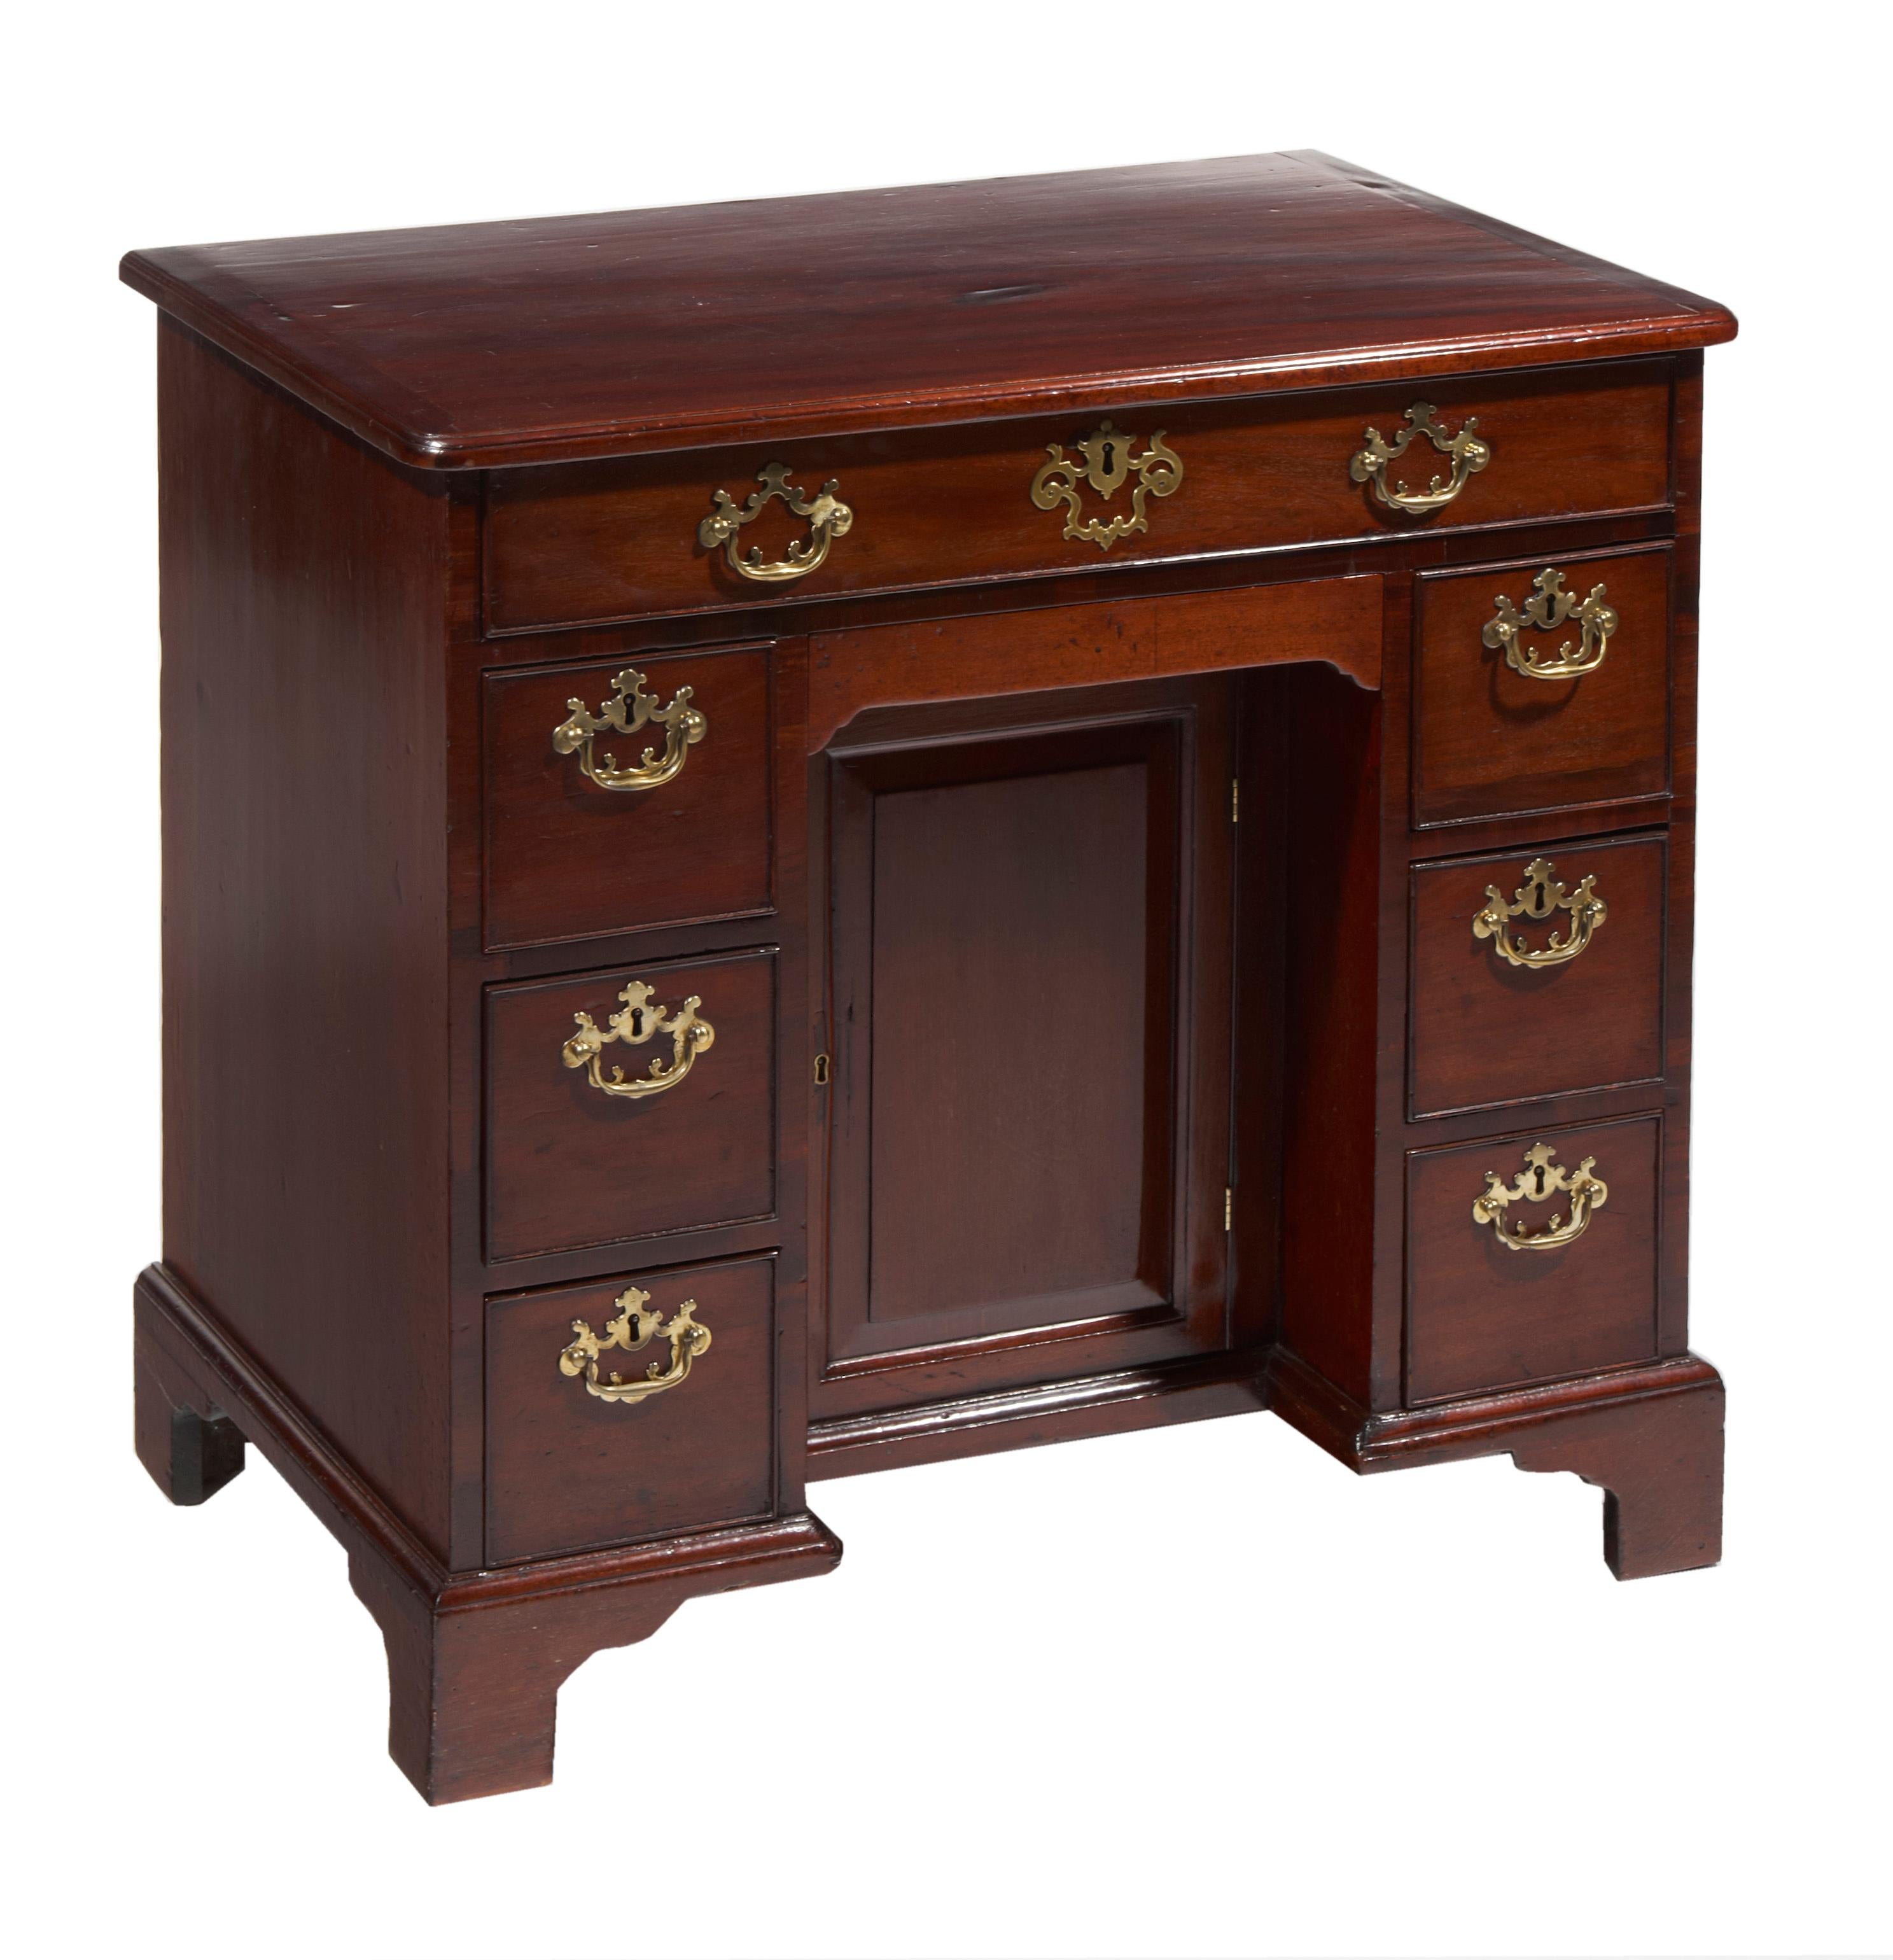 18th Century George II Mahogany Kneehole Desk In Good Condition For Sale In Dublin 8, IE